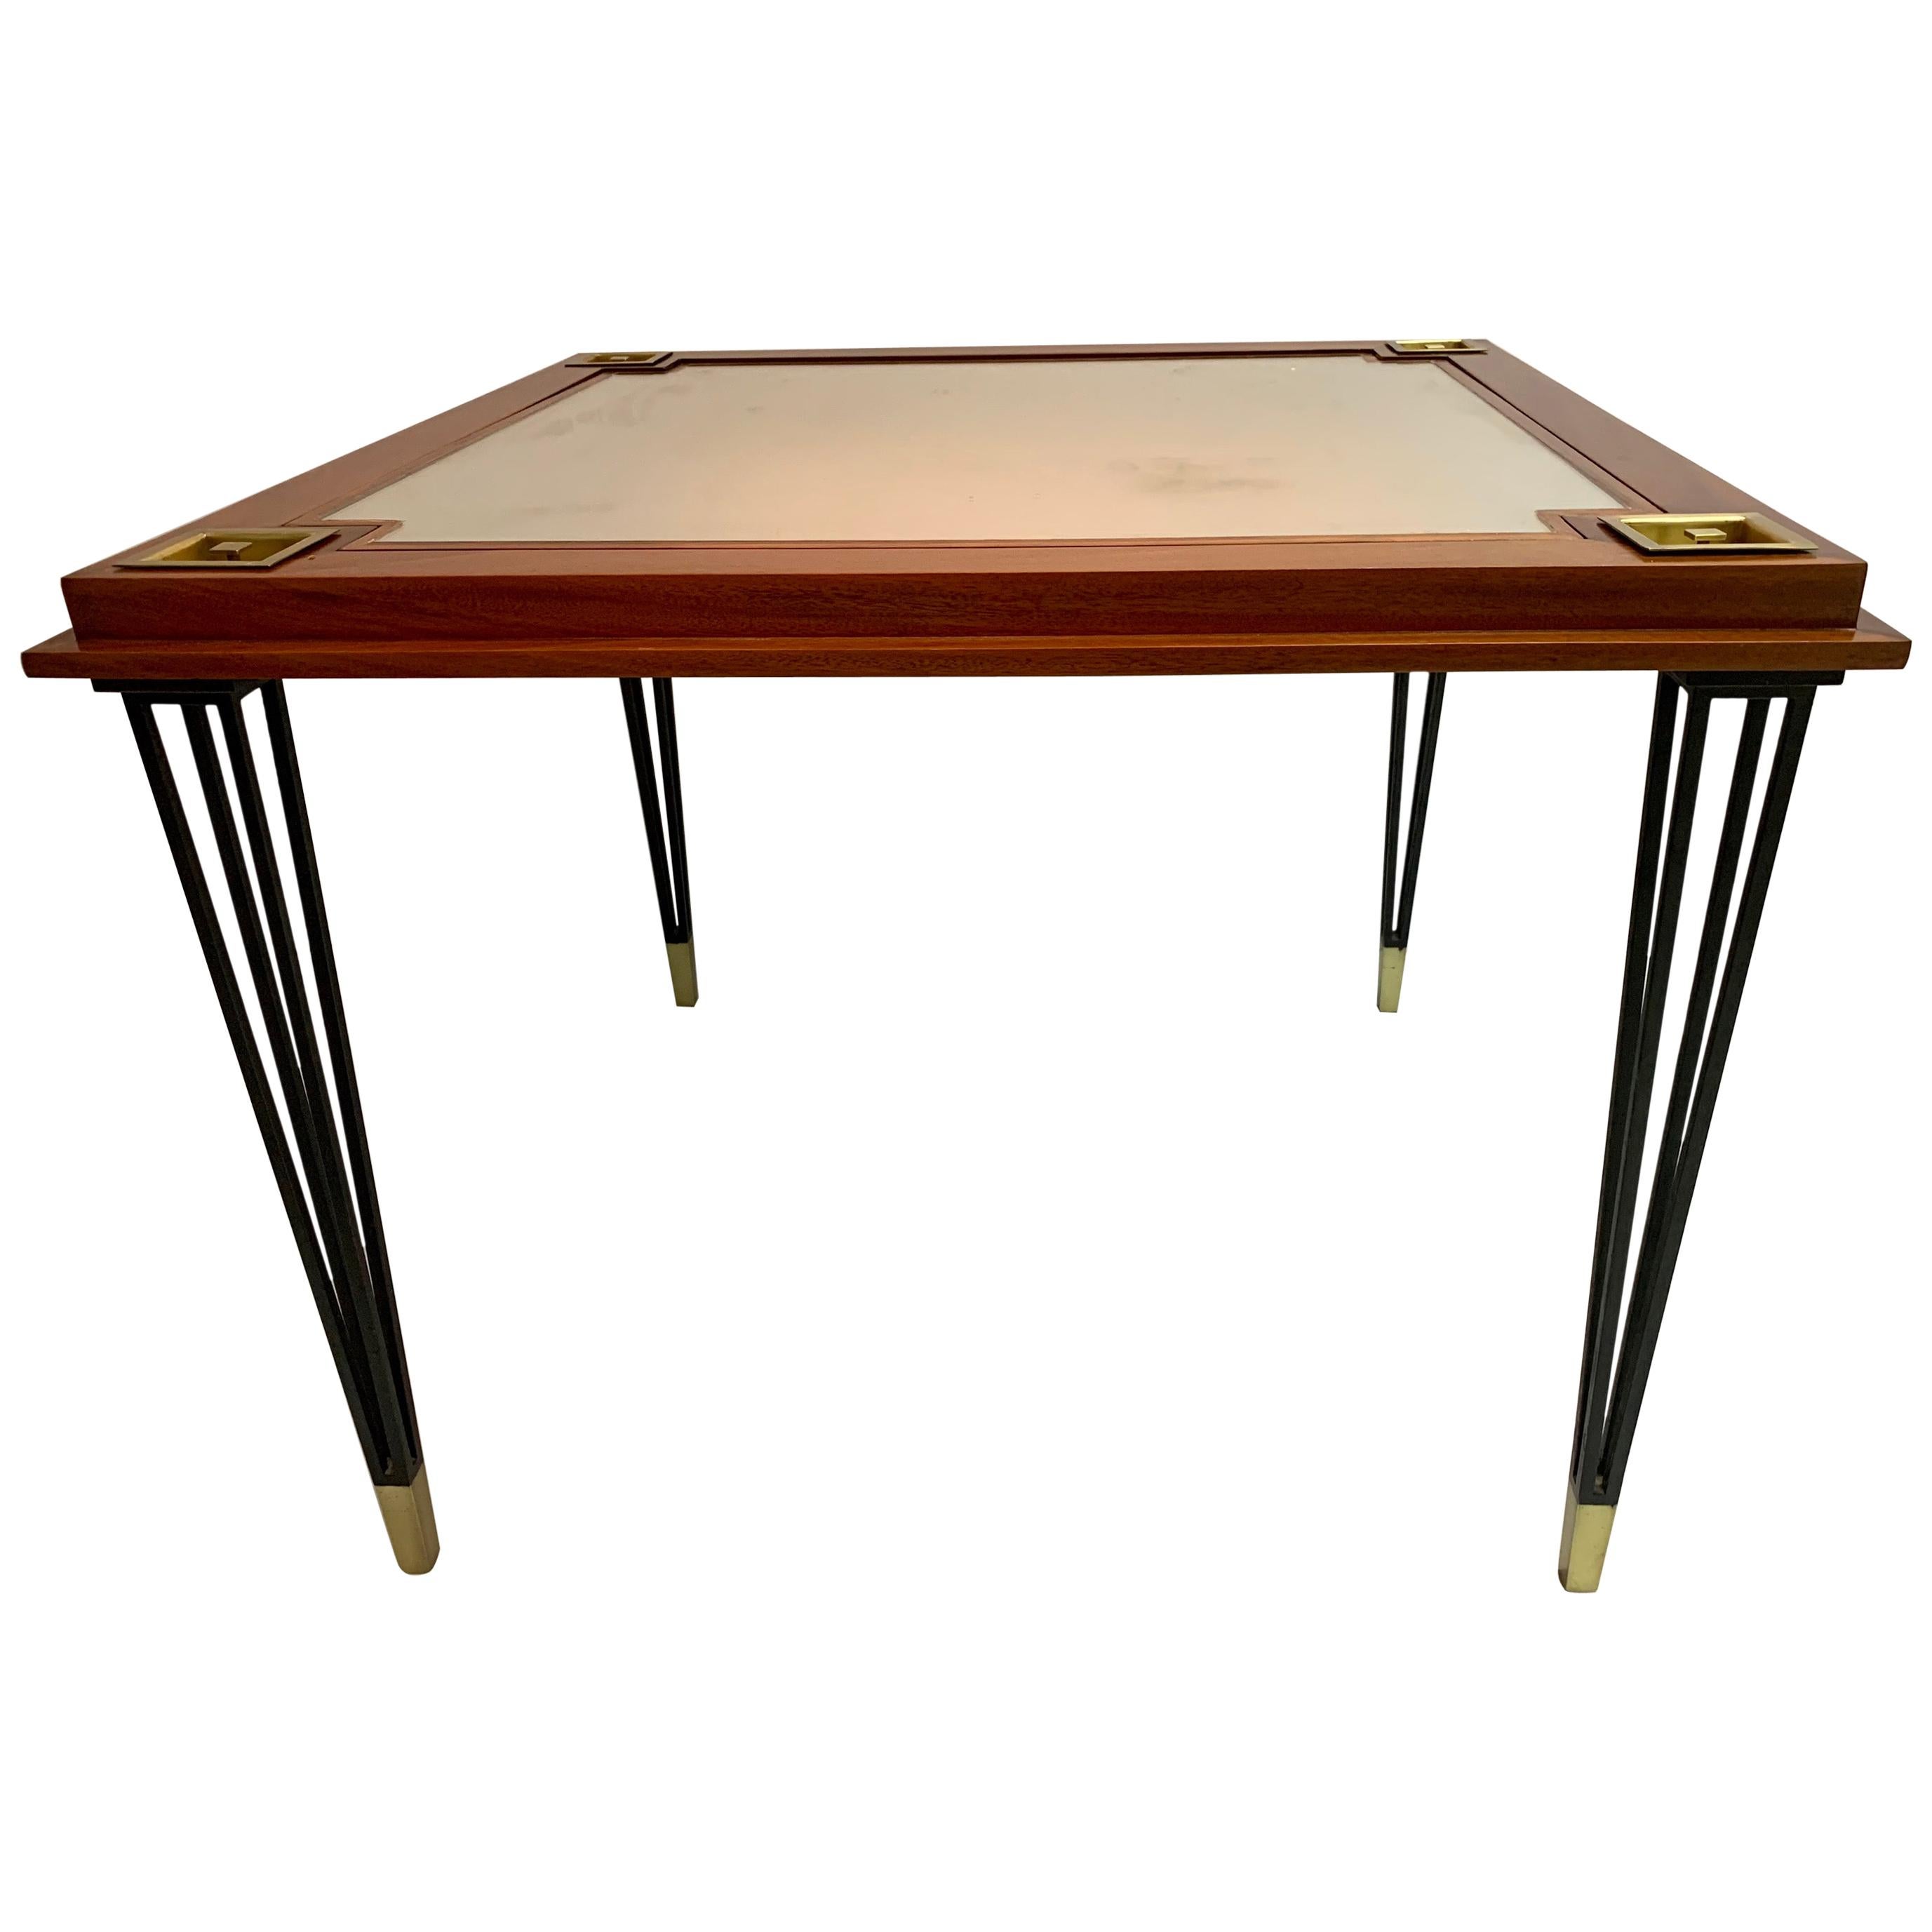 Customized Game Table by Roberto and Mito Block, México, 1953